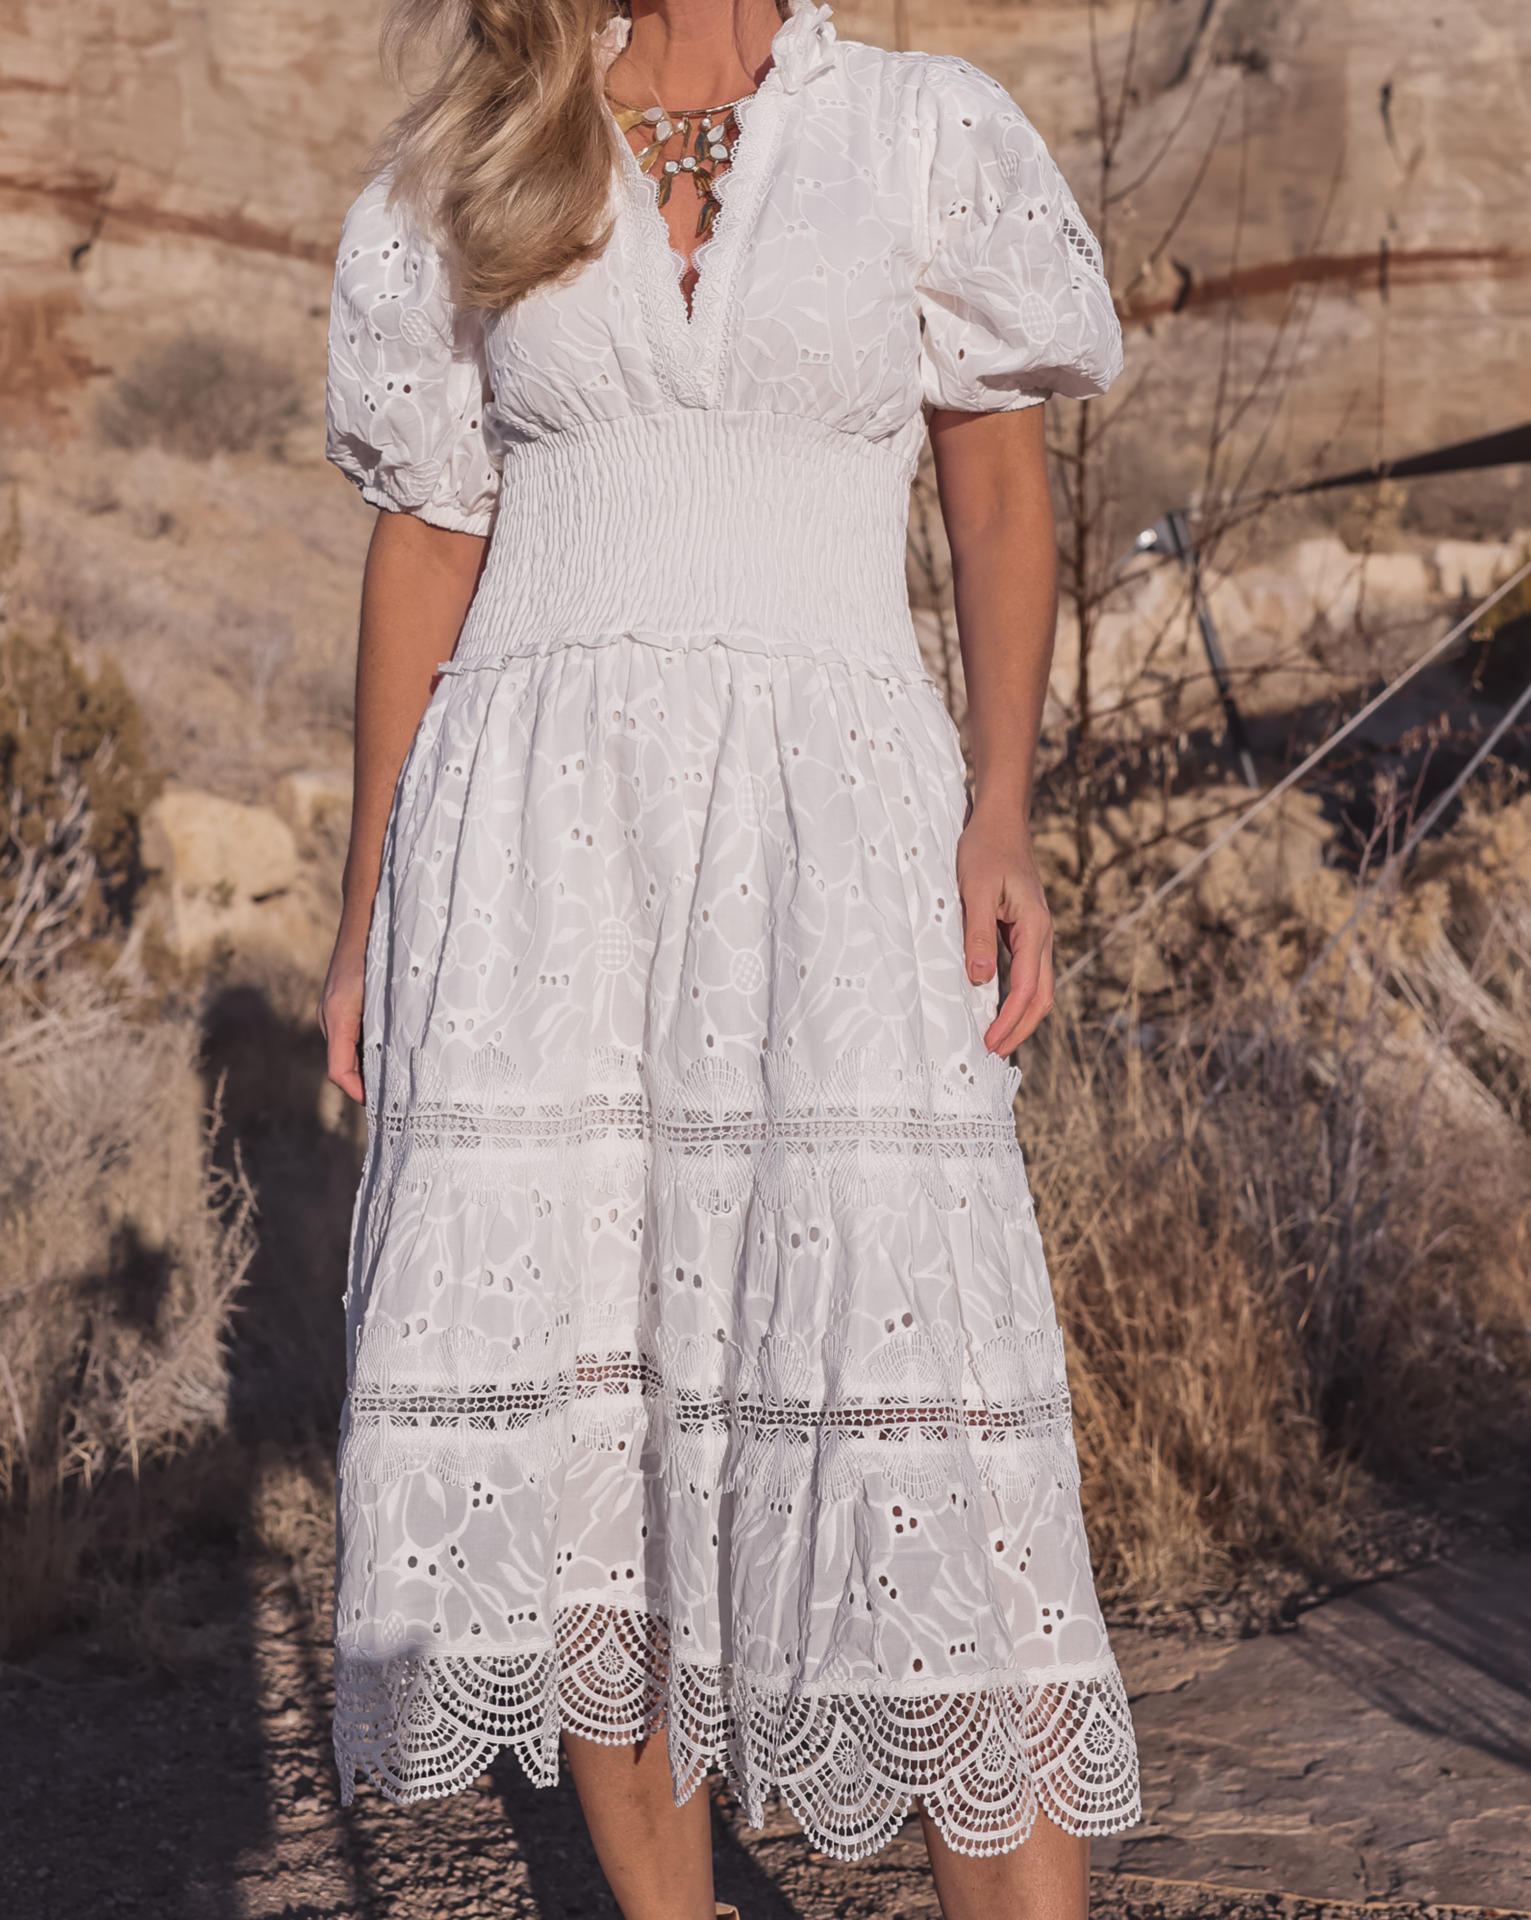 white dresses, resort white dresses, best white dresses, white dresses over 40, what to wear on vacation, summer white dresses, spring white dresses, erin busbee, busbee style, waimari white midi dress, see by chloe wedges, ulla johnson statement necklace, gucci round sunglasses